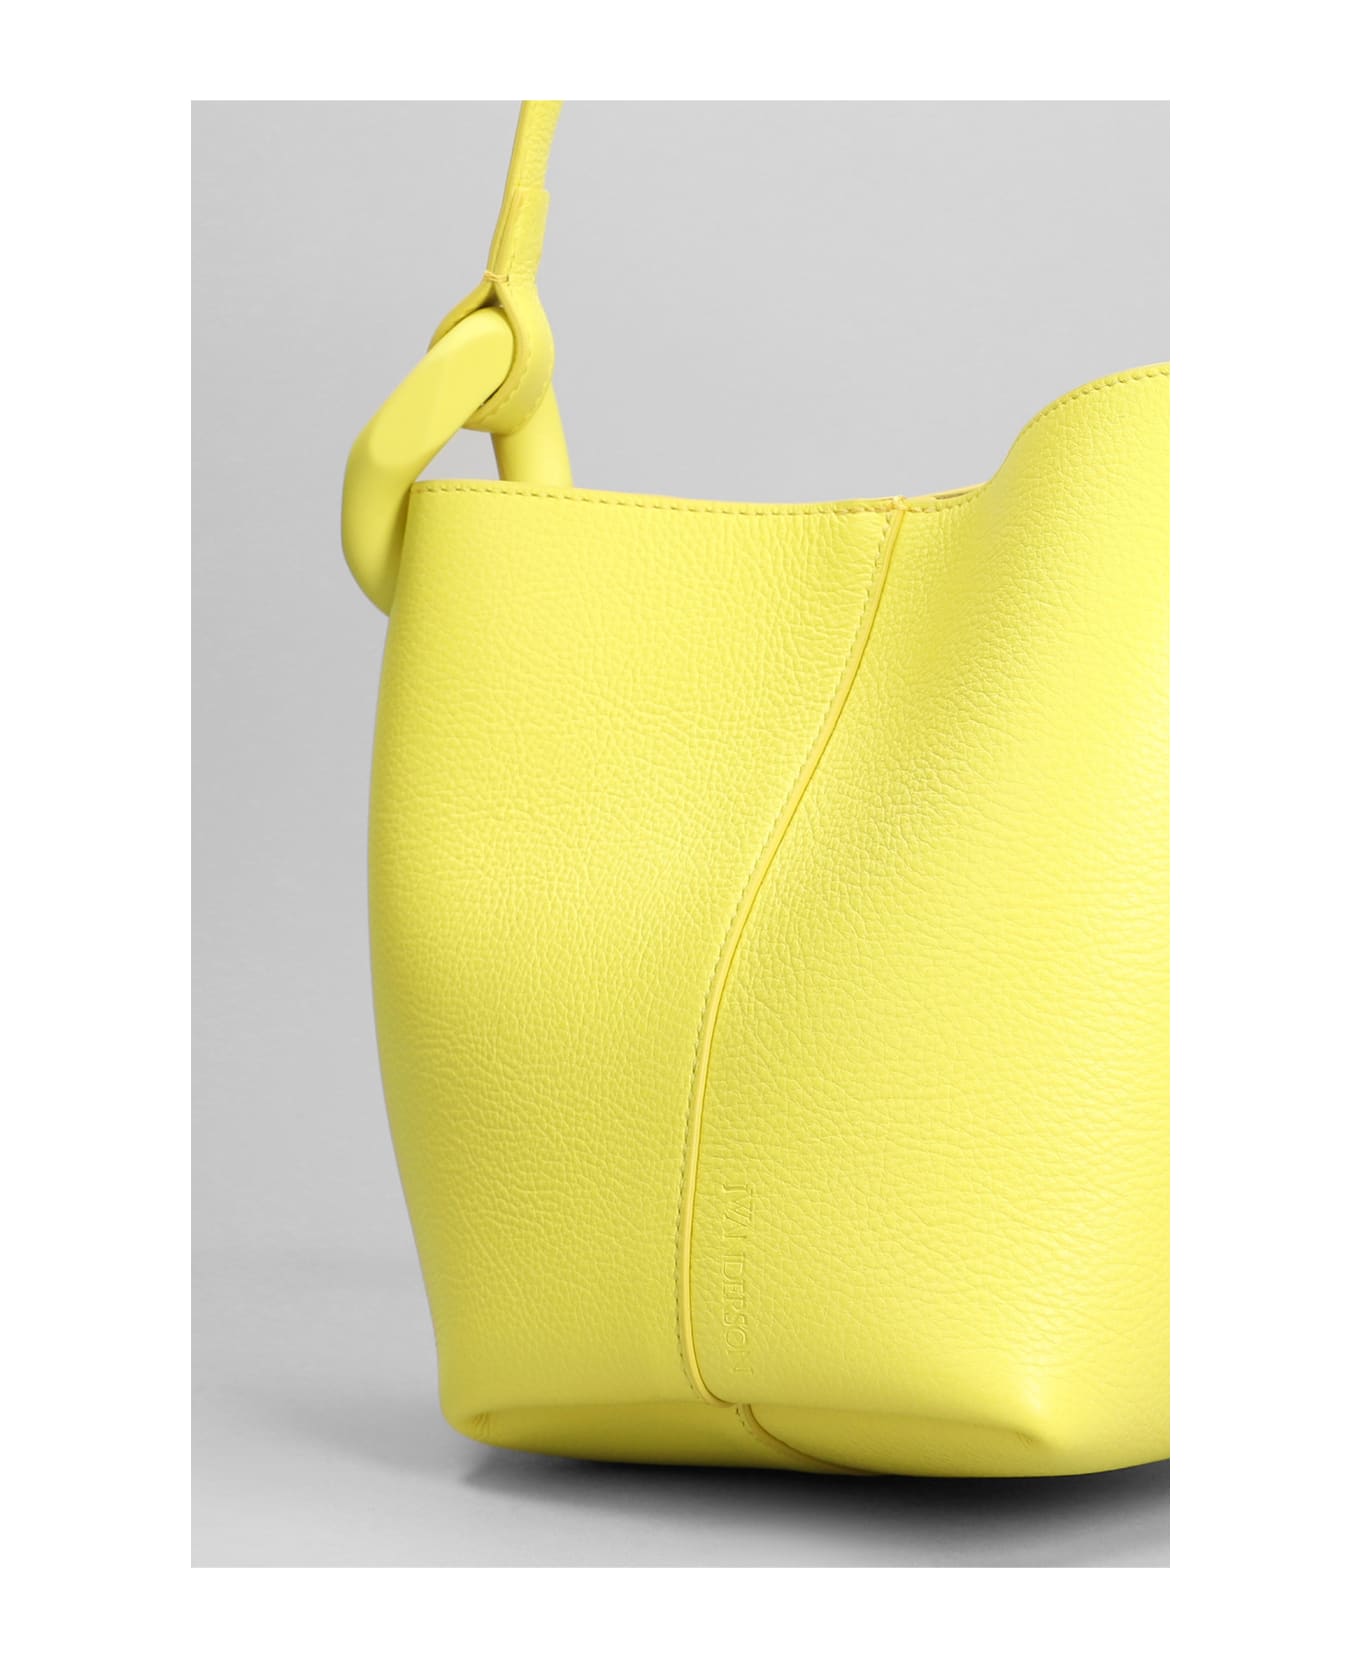 J.W. Anderson Corner Leather Small Bucket Bag - Yellow トートバッグ